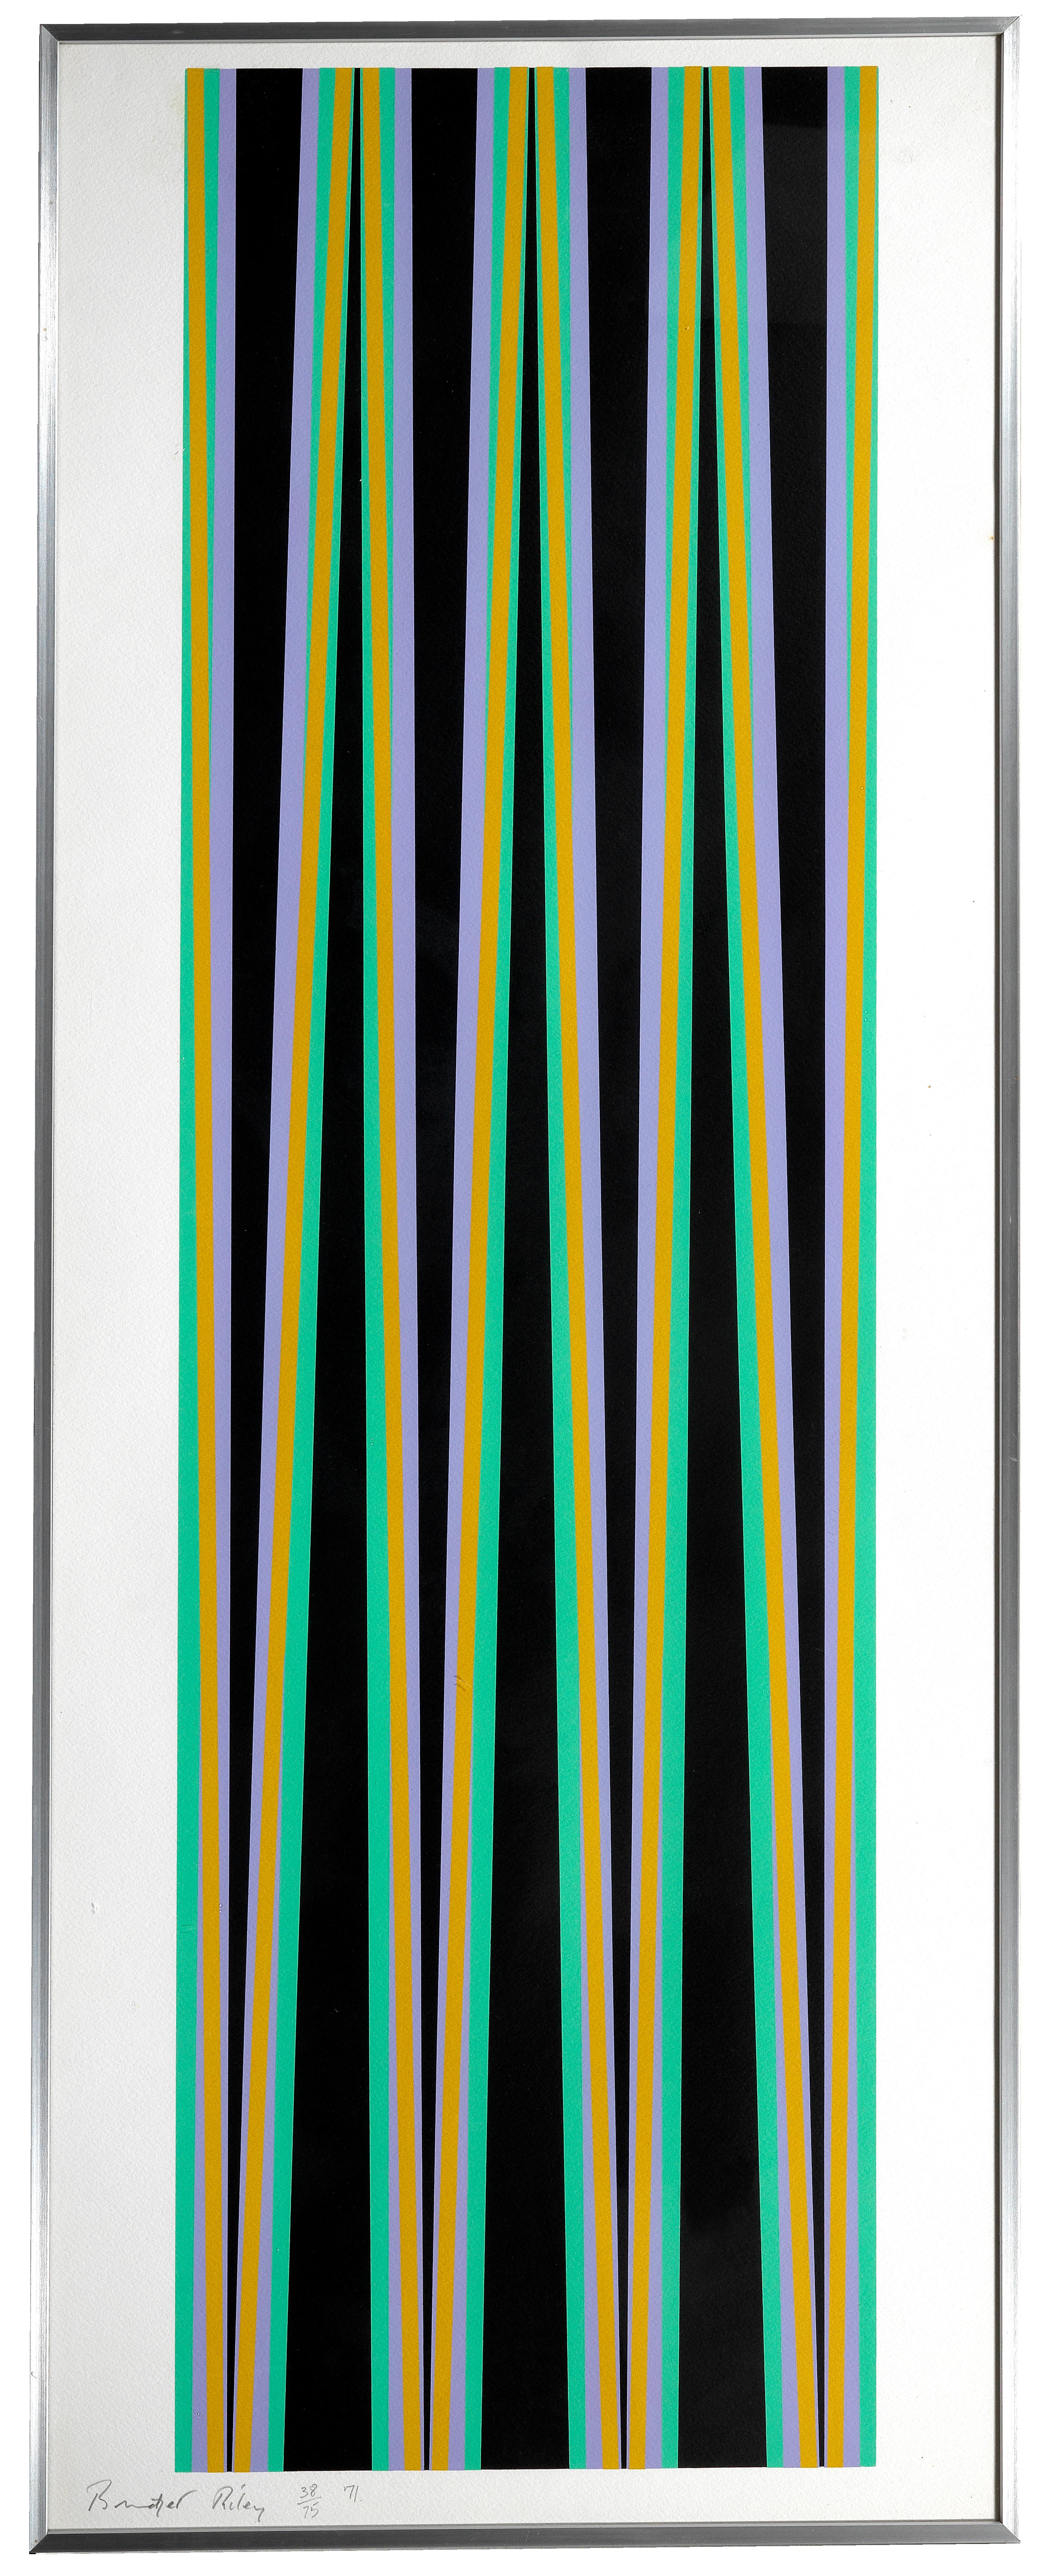 Untitled (Elongated Triangles 6) - Print by Bridget Riley